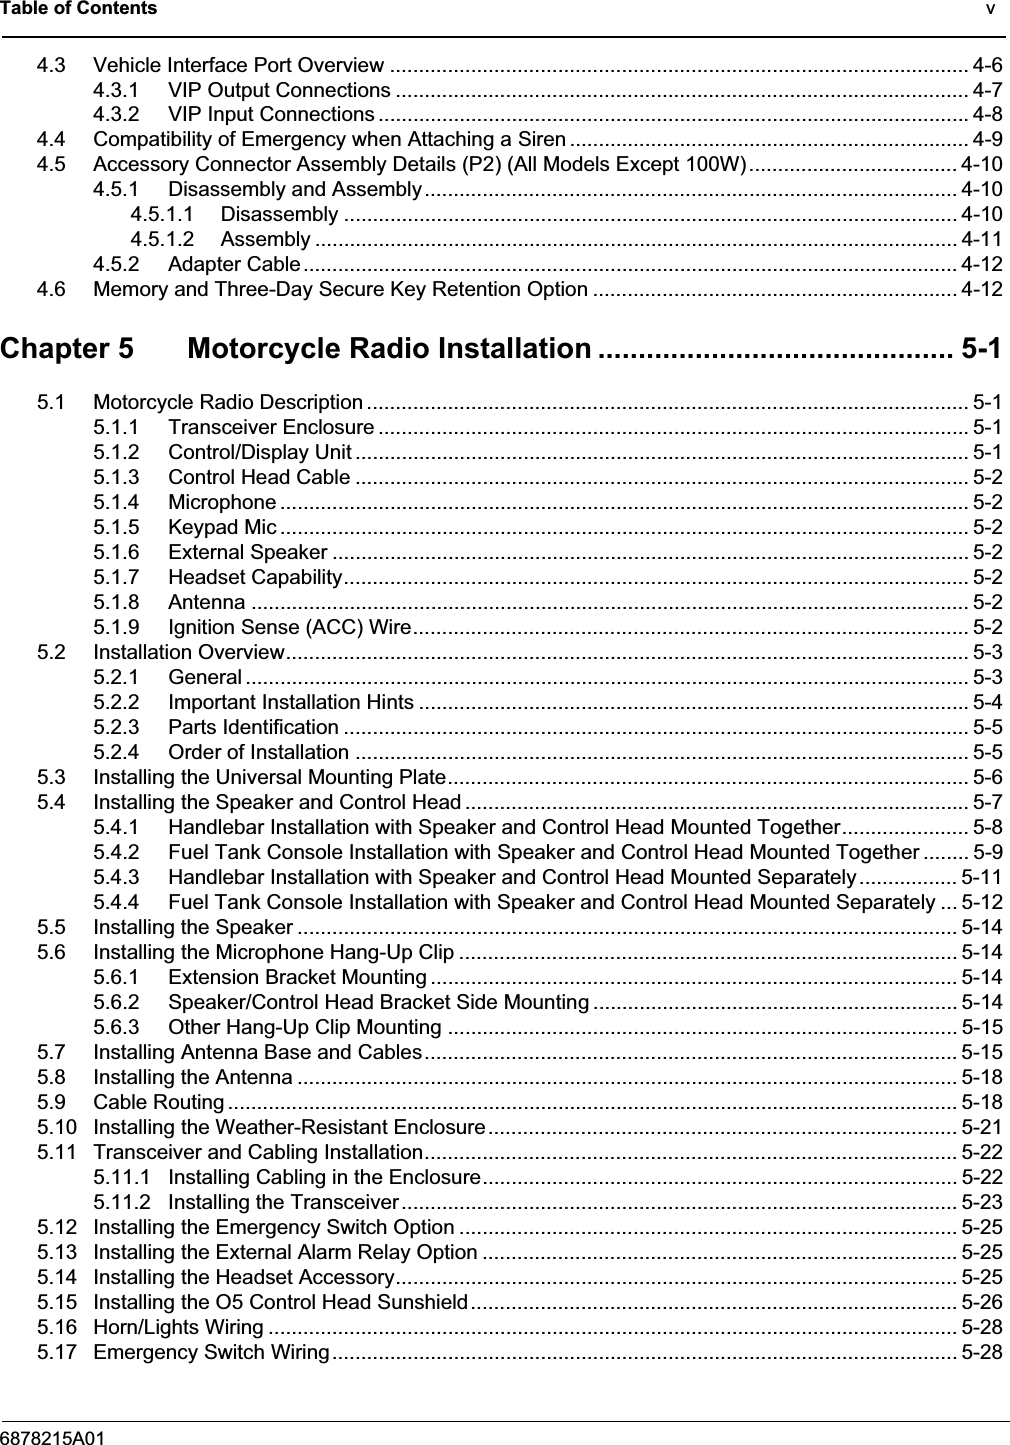 Table of Contents                                                                                              v6878215A014.3 Vehicle Interface Port Overview .................................................................................................... 4-64.3.1 VIP Output Connections ................................................................................................... 4-74.3.2 VIP Input Connections ......................................................................................................4-84.4 Compatibility of Emergency when Attaching a Siren ..................................................................... 4-94.5 Accessory Connector Assembly Details (P2) (All Models Except 100W).................................... 4-104.5.1 Disassembly and Assembly............................................................................................ 4-104.5.1.1 Disassembly .......................................................................................................... 4-104.5.1.2 Assembly ............................................................................................................... 4-114.5.2 Adapter Cable................................................................................................................. 4-124.6 Memory and Three-Day Secure Key Retention Option ............................................................... 4-12Chapter 5 Motorcycle Radio Installation ............................................ 5-15.1 Motorcycle Radio Description ........................................................................................................ 5-15.1.1 Transceiver Enclosure ......................................................................................................5-15.1.2 Control/Display Unit .......................................................................................................... 5-15.1.3 Control Head Cable .......................................................................................................... 5-25.1.4 Microphone ....................................................................................................................... 5-25.1.5 Keypad Mic ....................................................................................................................... 5-25.1.6 External Speaker .............................................................................................................. 5-25.1.7 Headset Capability............................................................................................................ 5-25.1.8 Antenna ............................................................................................................................ 5-25.1.9 Ignition Sense (ACC) Wire................................................................................................ 5-25.2 Installation Overview...................................................................................................................... 5-35.2.1 General ............................................................................................................................. 5-35.2.2 Important Installation Hints ...............................................................................................5-45.2.3 Parts Identification ............................................................................................................ 5-55.2.4 Order of Installation .......................................................................................................... 5-55.3 Installing the Universal Mounting Plate.......................................................................................... 5-65.4 Installing the Speaker and Control Head ....................................................................................... 5-75.4.1 Handlebar Installation with Speaker and Control Head Mounted Together...................... 5-85.4.2 Fuel Tank Console Installation with Speaker and Control Head Mounted Together ........ 5-95.4.3 Handlebar Installation with Speaker and Control Head Mounted Separately ................. 5-115.4.4 Fuel Tank Console Installation with Speaker and Control Head Mounted Separately ... 5-125.5 Installing the Speaker .................................................................................................................. 5-145.6 Installing the Microphone Hang-Up Clip ...................................................................................... 5-145.6.1 Extension Bracket Mounting ........................................................................................... 5-145.6.2 Speaker/Control Head Bracket Side Mounting ............................................................... 5-145.6.3 Other Hang-Up Clip Mounting ........................................................................................ 5-155.7 Installing Antenna Base and Cables............................................................................................ 5-155.8 Installing the Antenna .................................................................................................................. 5-185.9 Cable Routing .............................................................................................................................. 5-185.10 Installing the Weather-Resistant Enclosure................................................................................. 5-215.11 Transceiver and Cabling Installation............................................................................................ 5-225.11.1 Installing Cabling in the Enclosure.................................................................................. 5-225.11.2 Installing the Transceiver................................................................................................5-235.12 Installing the Emergency Switch Option ......................................................................................5-255.13 Installing the External Alarm Relay Option ..................................................................................5-255.14 Installing the Headset Accessory................................................................................................. 5-255.15 Installing the O5 Control Head Sunshield....................................................................................5-265.16 Horn/Lights Wiring ....................................................................................................................... 5-285.17 Emergency Switch Wiring............................................................................................................ 5-28